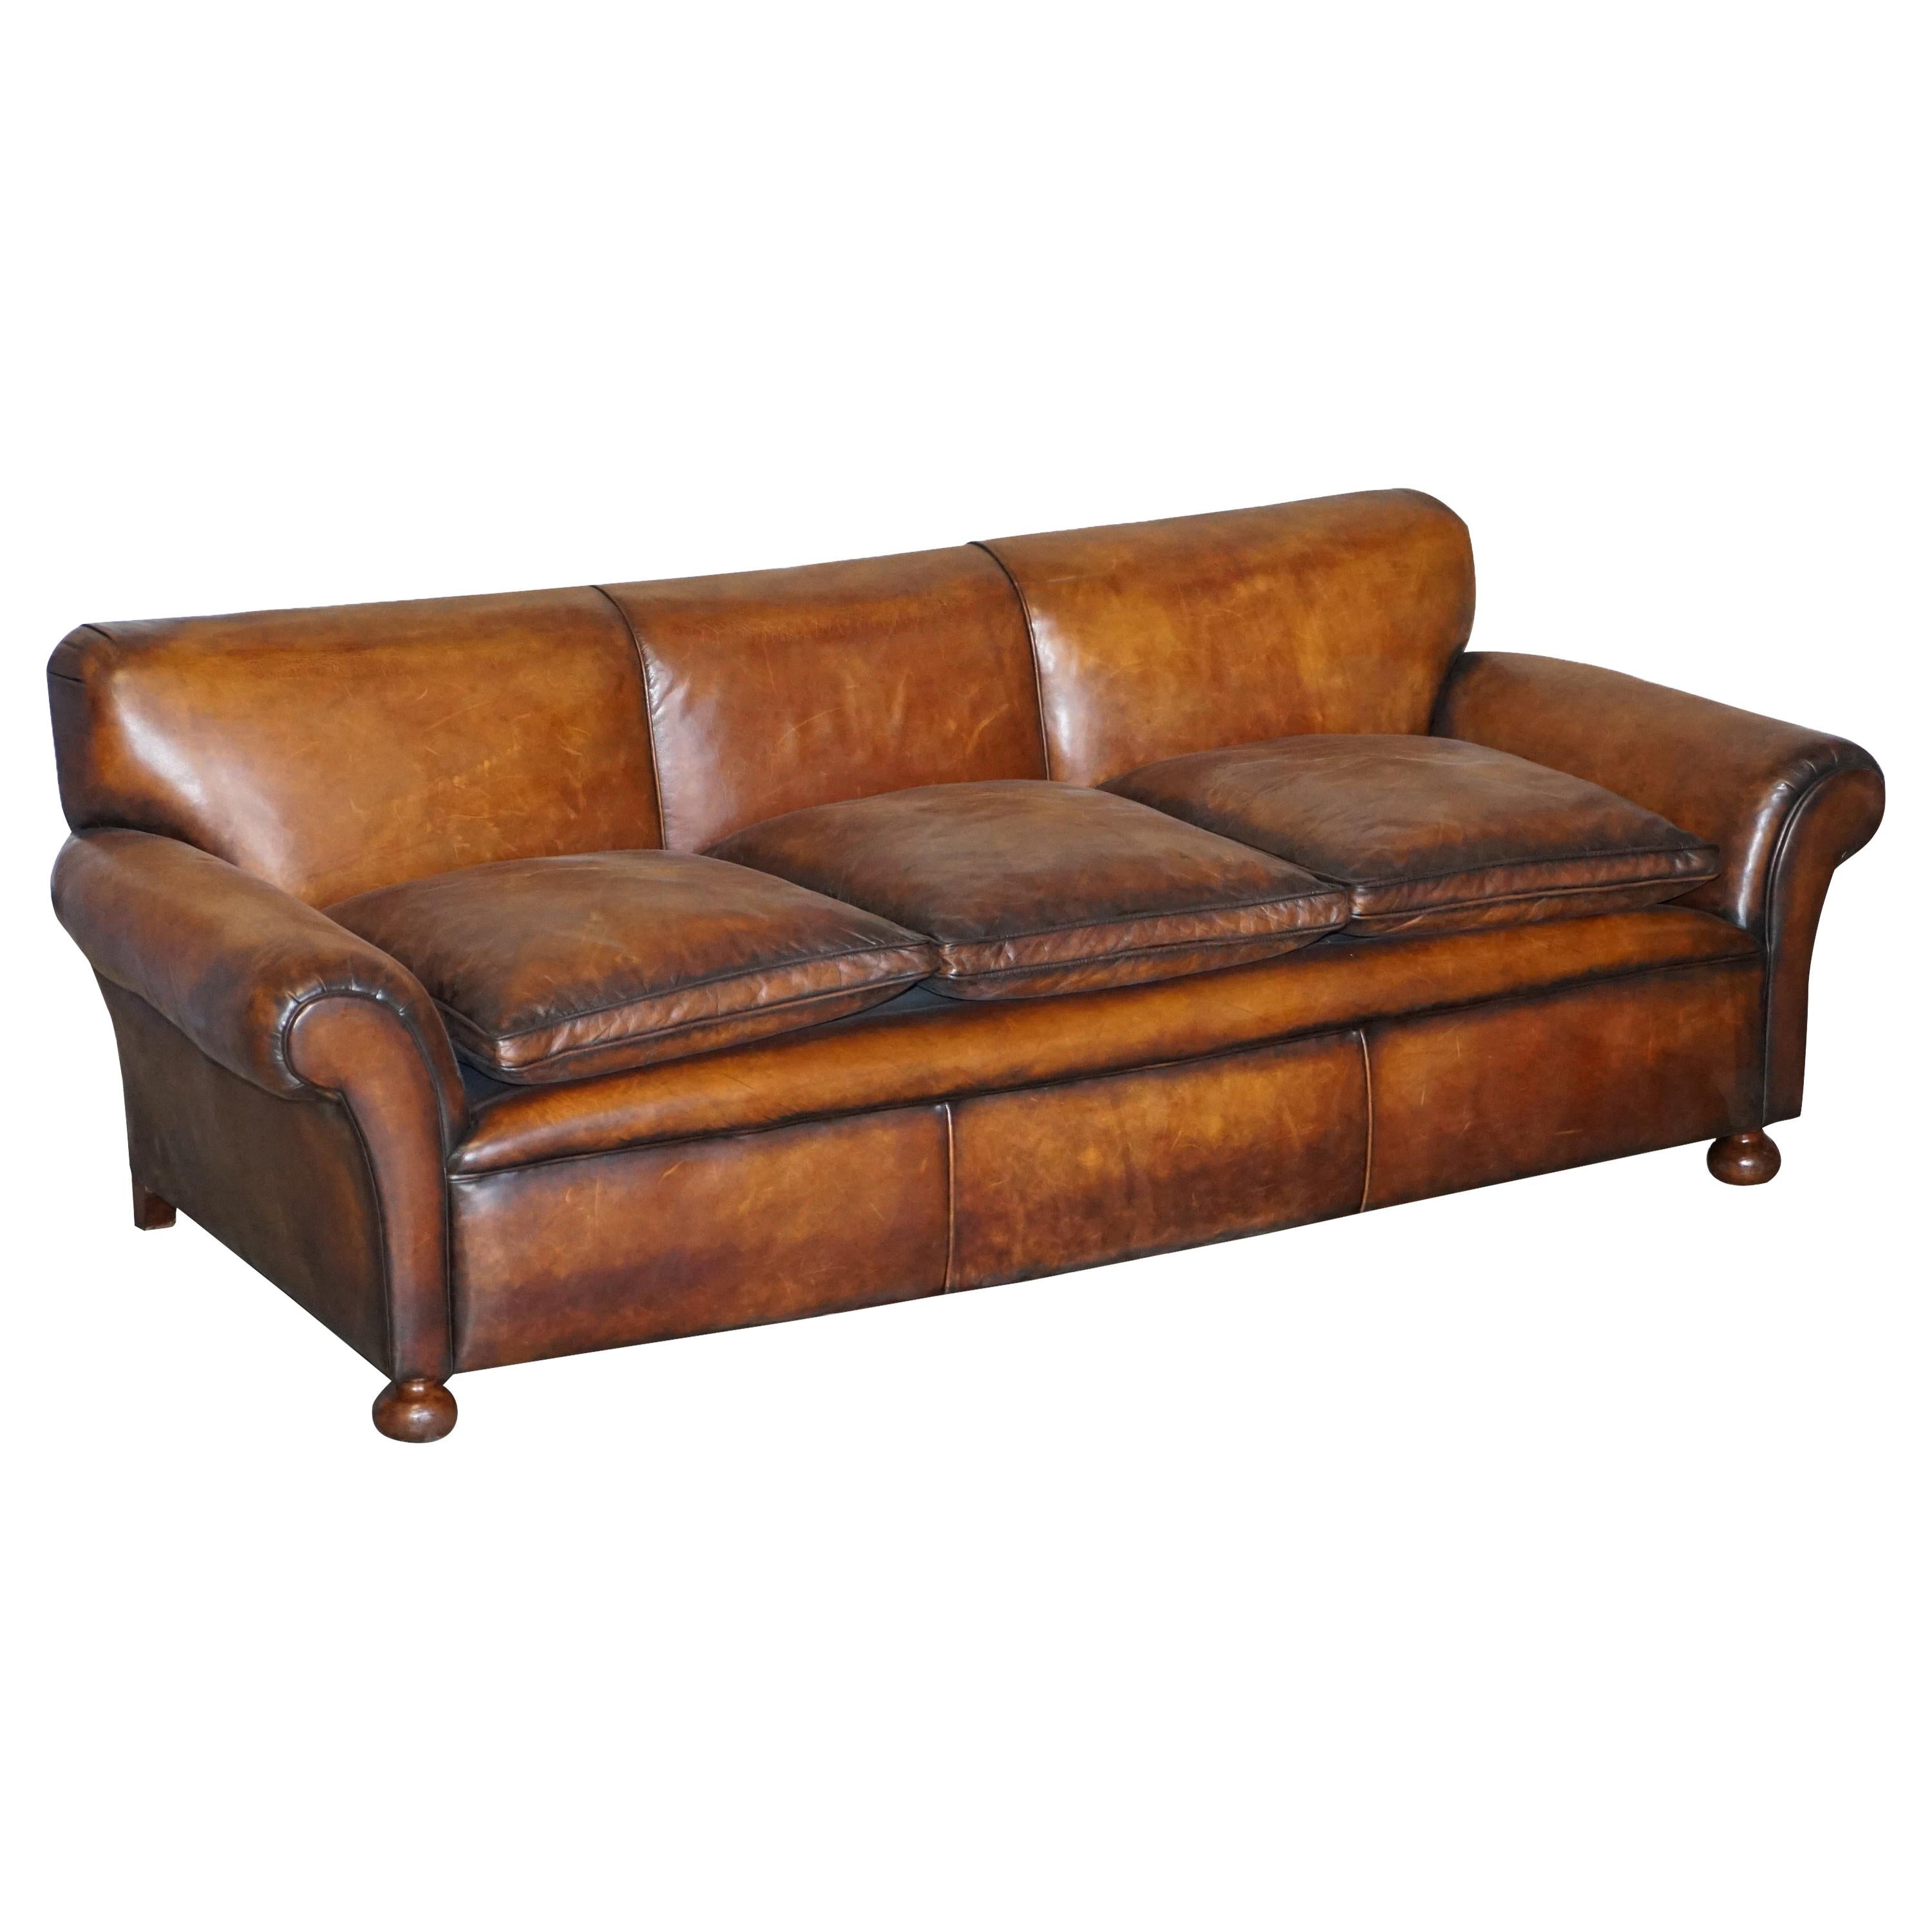 Restored Hand Dyed Brown Leather Antique Victorian 3-4 Seat Sofa Feather Seats